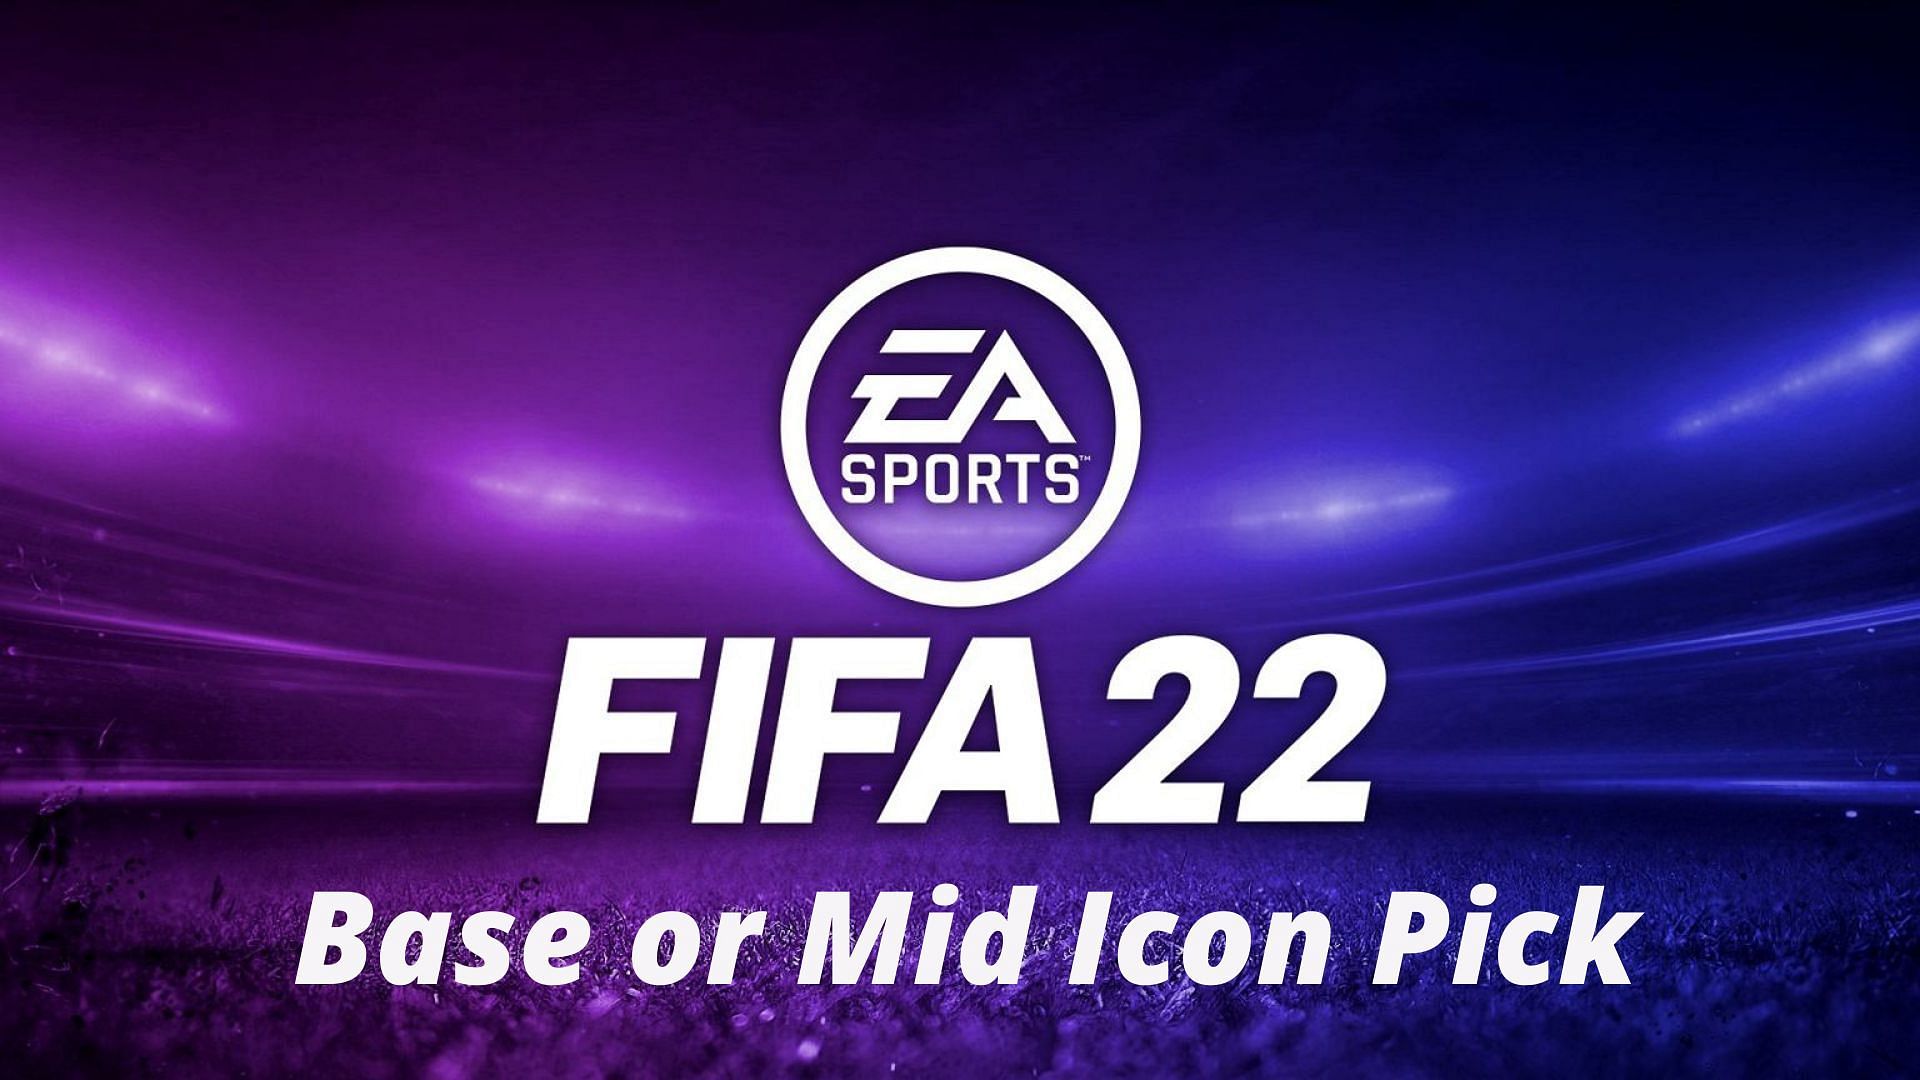 Base or Mid Icon Player pick is now live in FIFA 22 (Image via Sportskeeda)